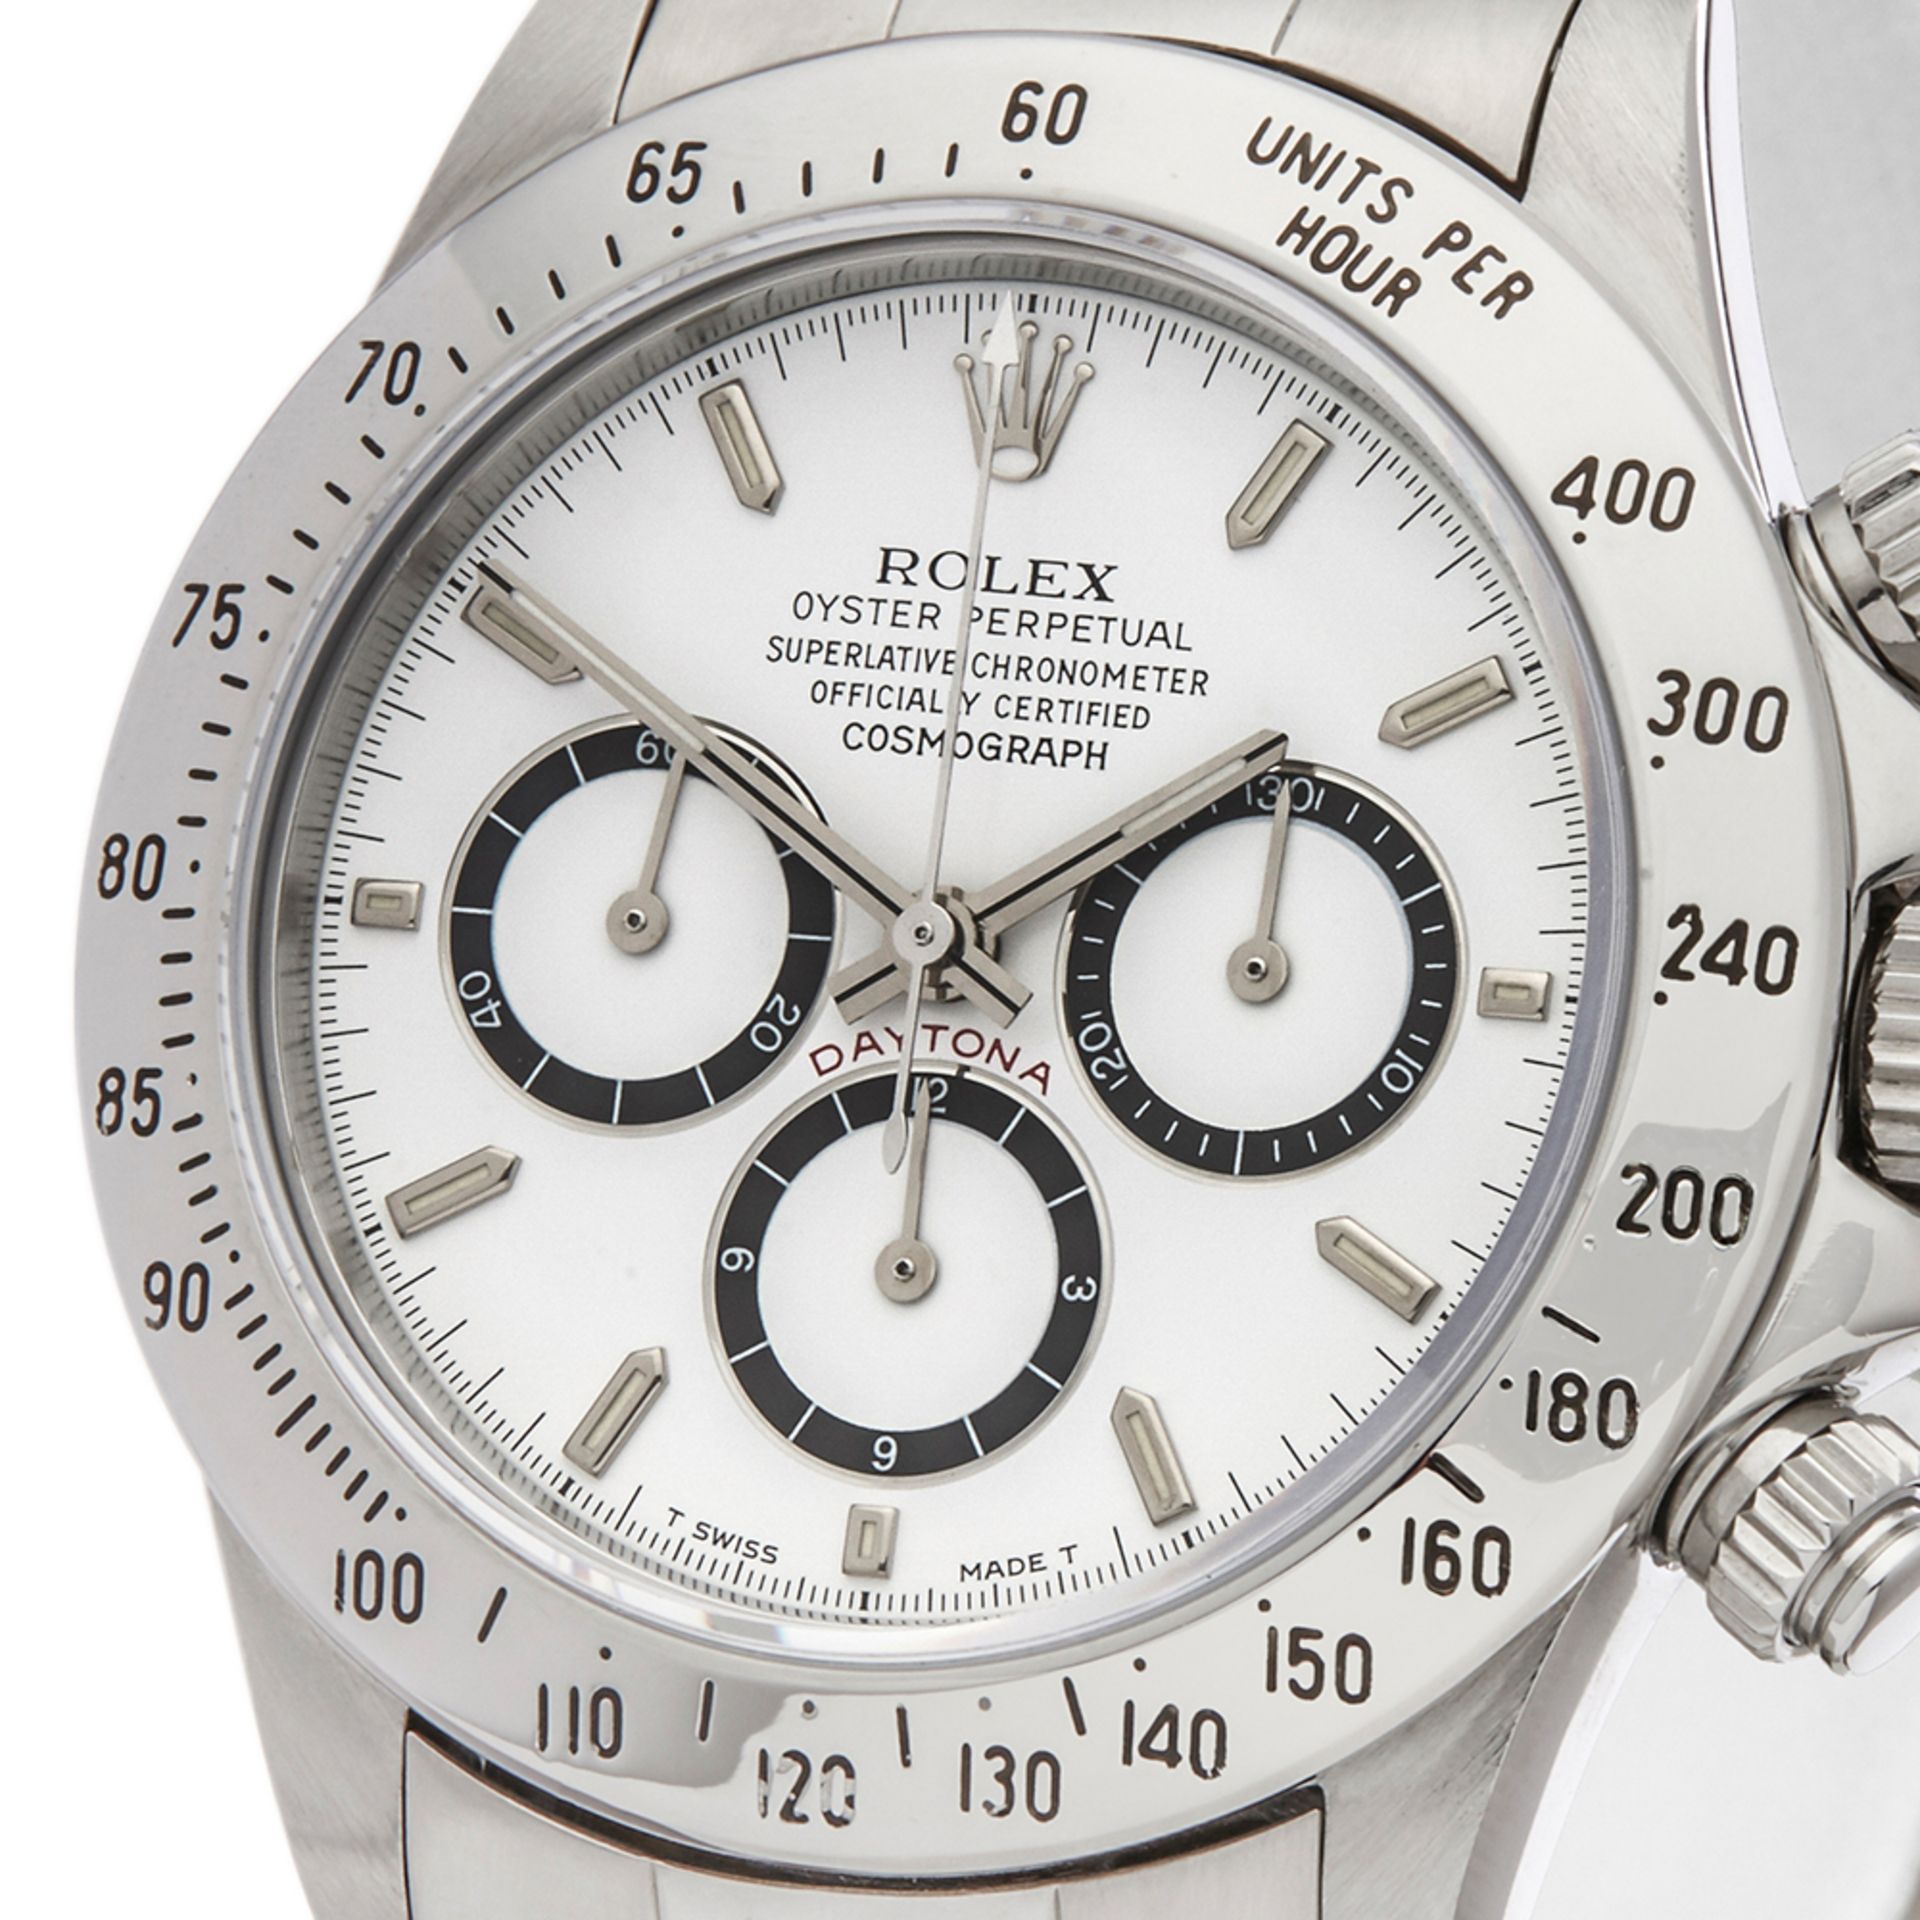 Rolex Daytona Inverted 6 Chronograpgh 40mm Stainless Steel - 16520